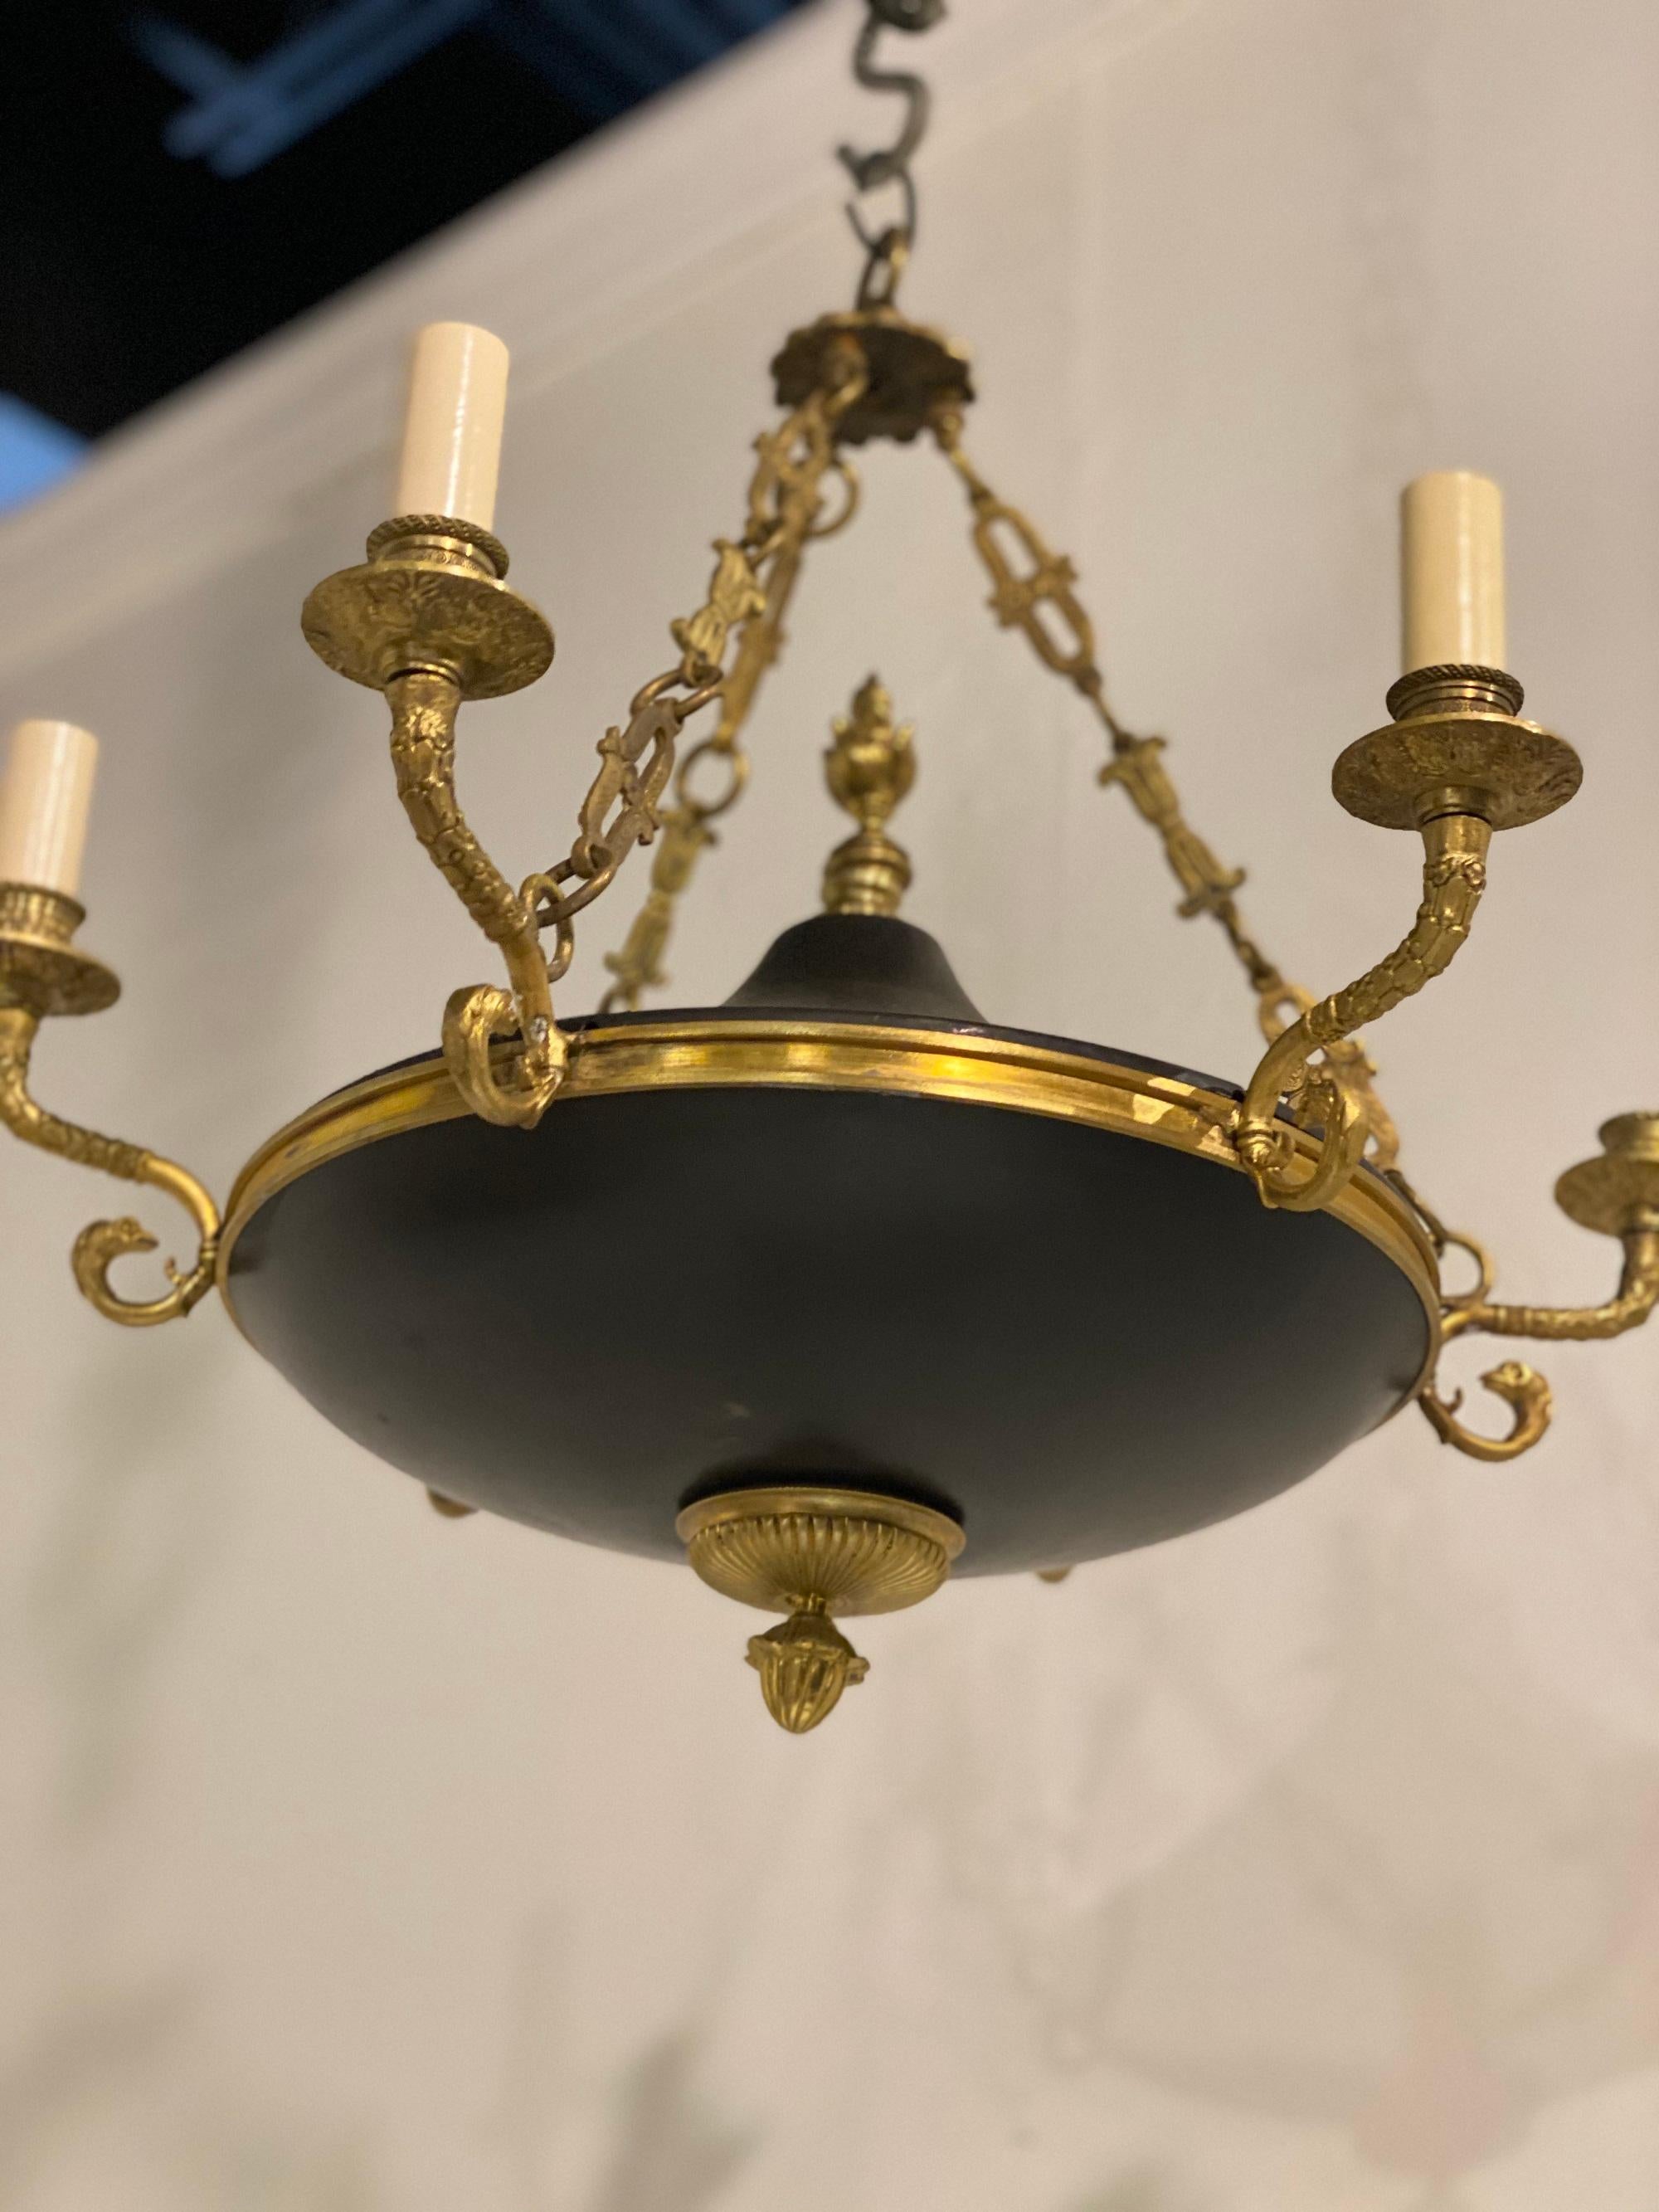 Painted 1900 French Empire Chandelier